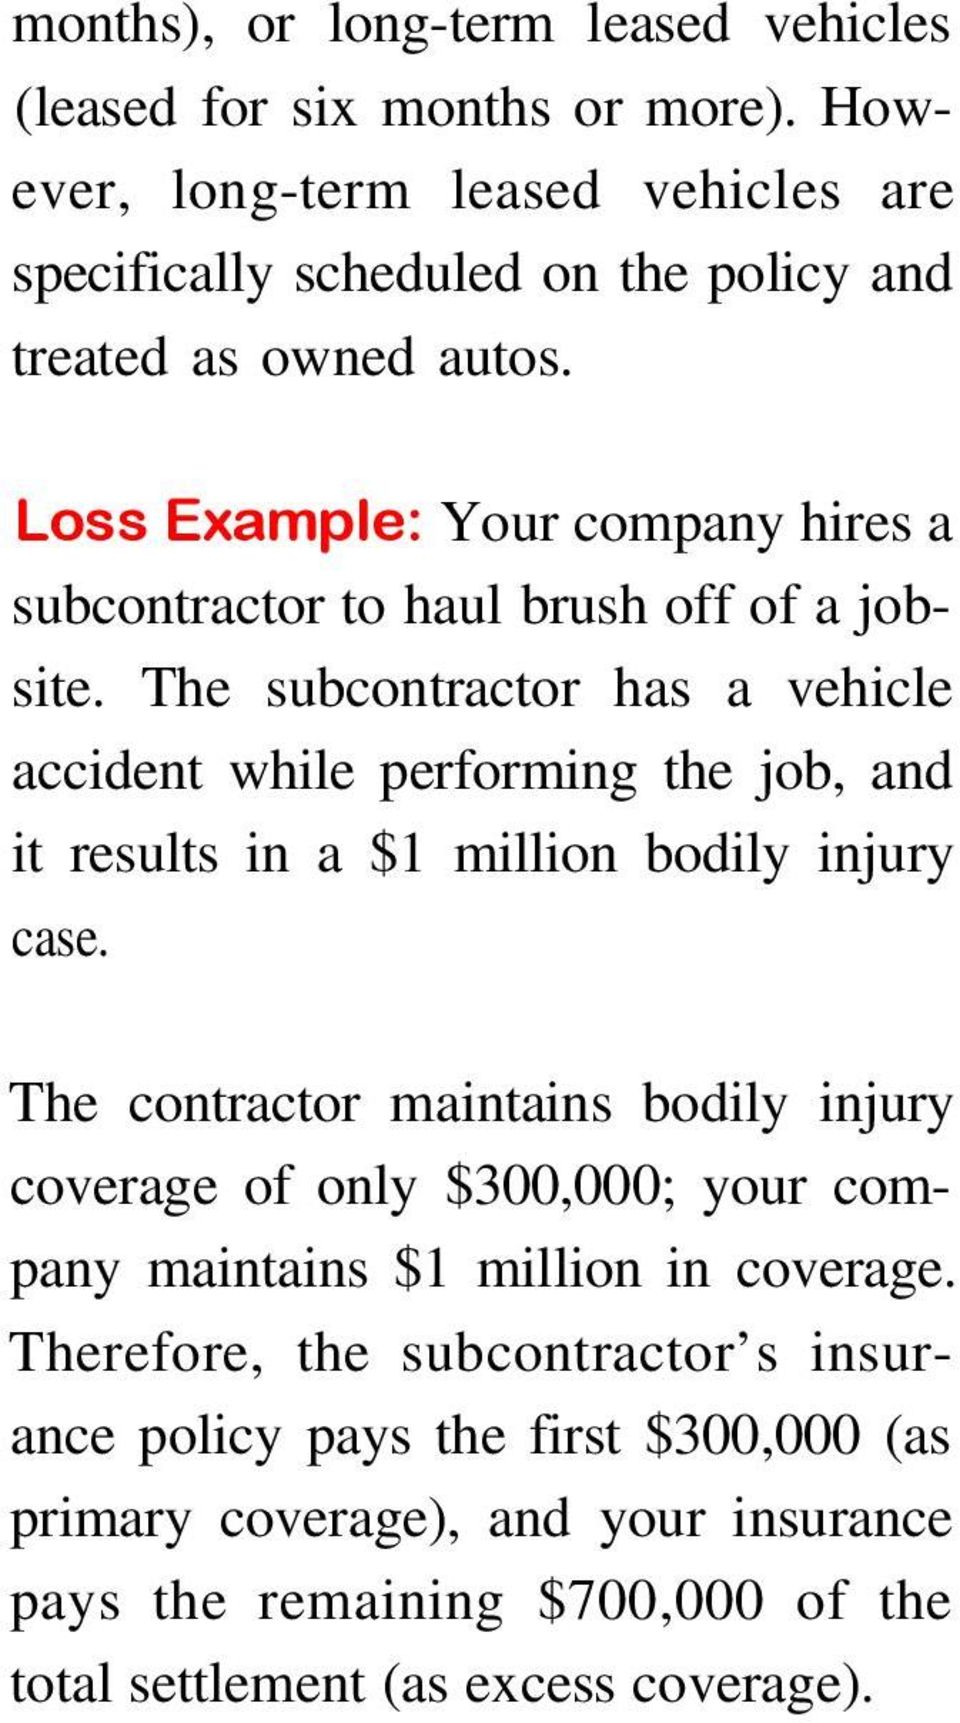 Loss Example: Your company hires a subcontractor to haul brush off of a jobsite.